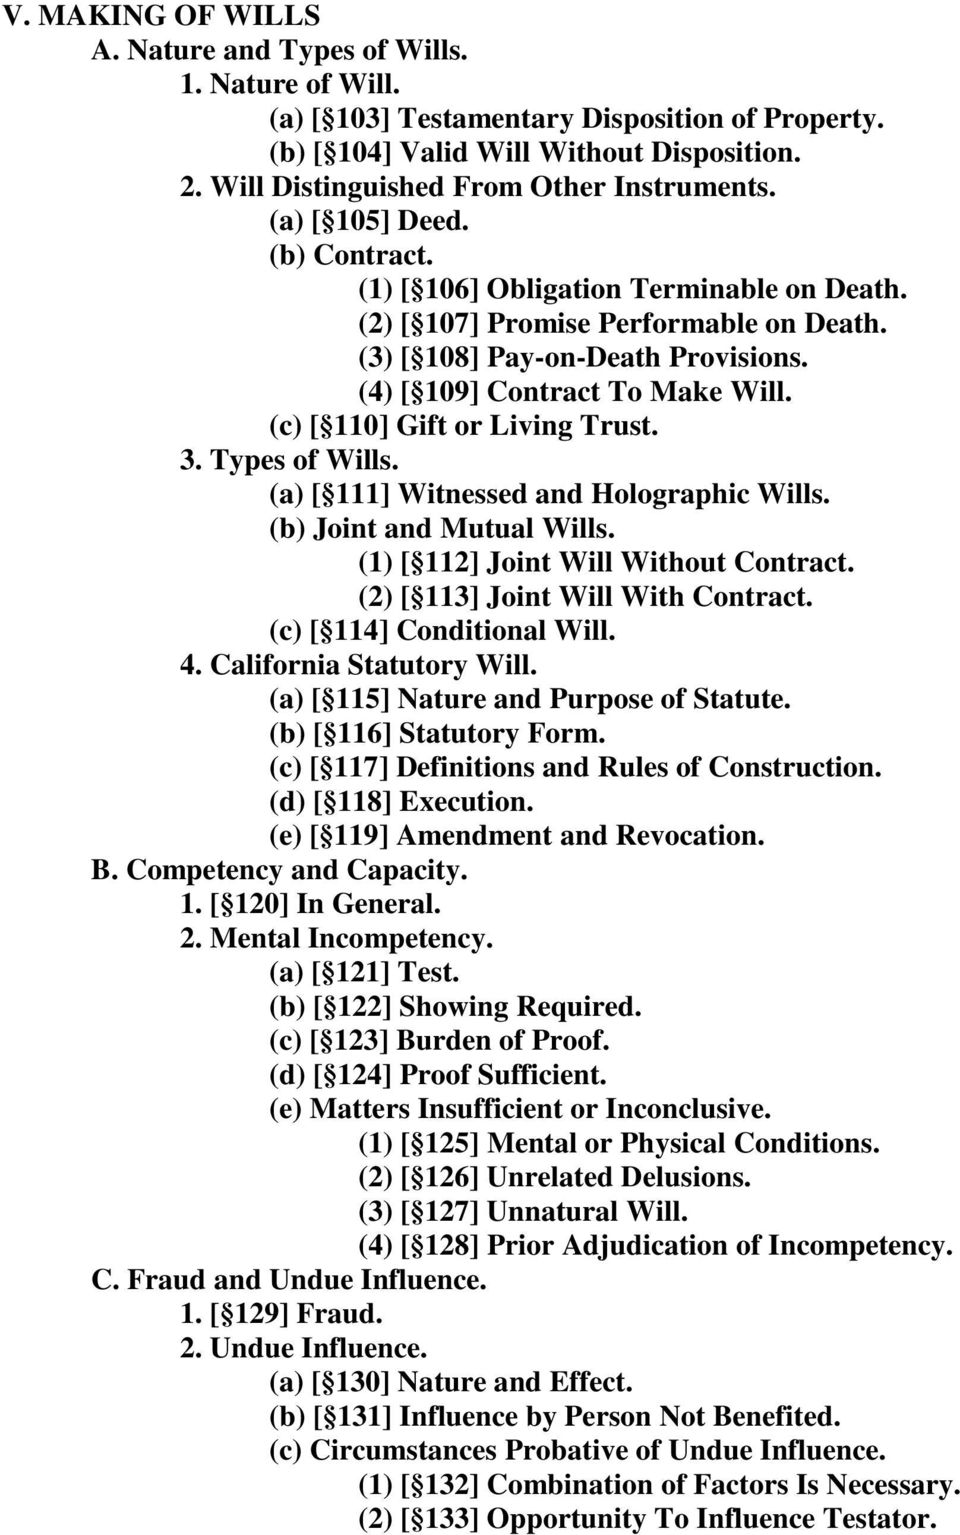 (4) [ 109] Contract To Make Will. (c) [ 110] Gift or Living Trust. 3. Types of Wills. (a) [ 111] Witnessed and Holographic Wills. (b) Joint and Mutual Wills. (1) [ 112] Joint Will Without Contract.